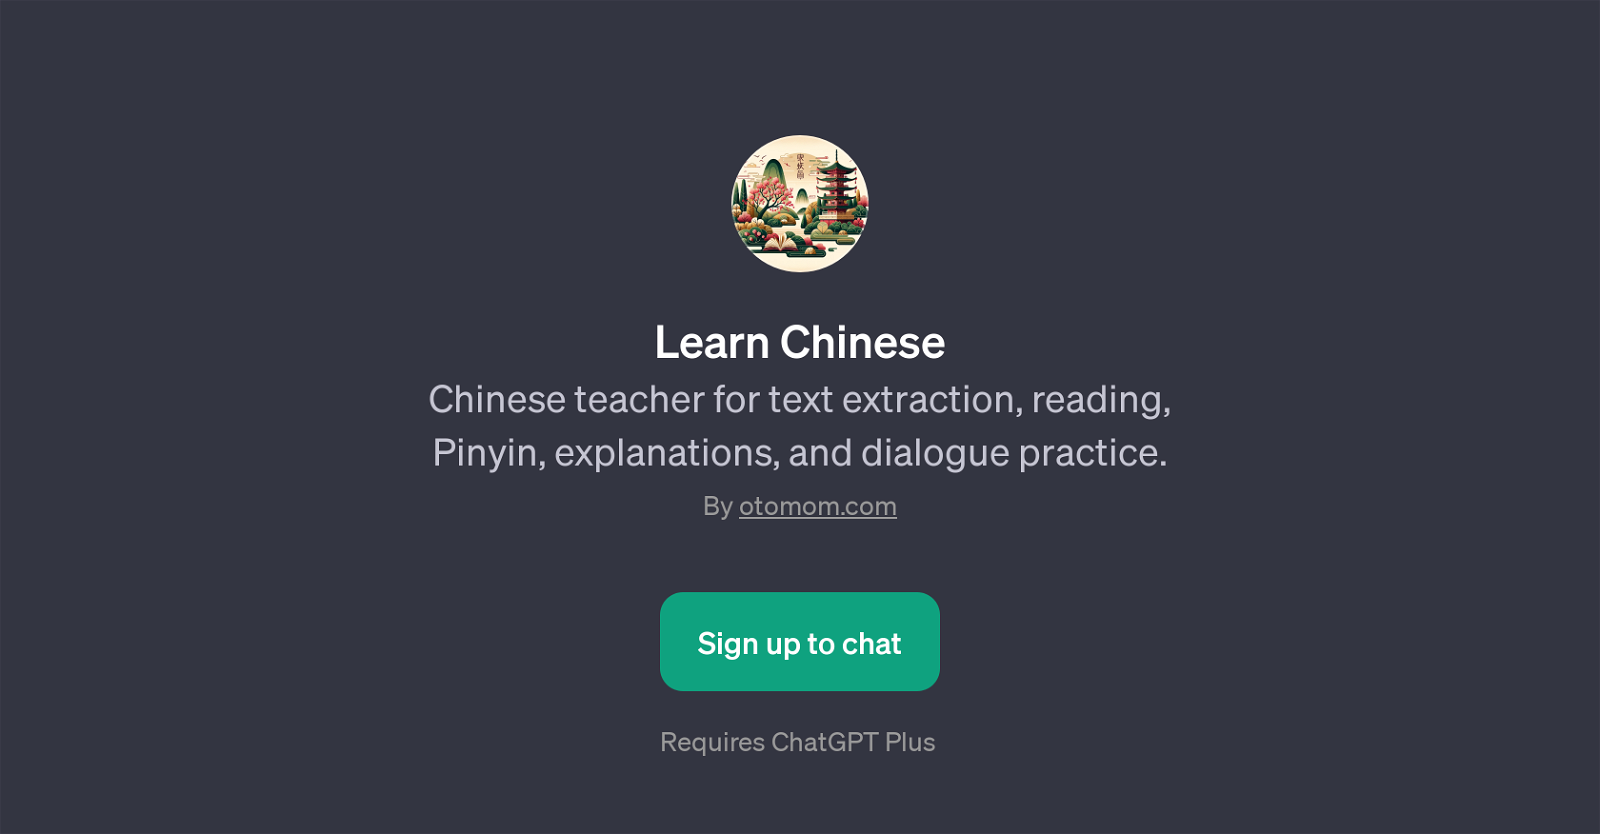 Learn Chinese website